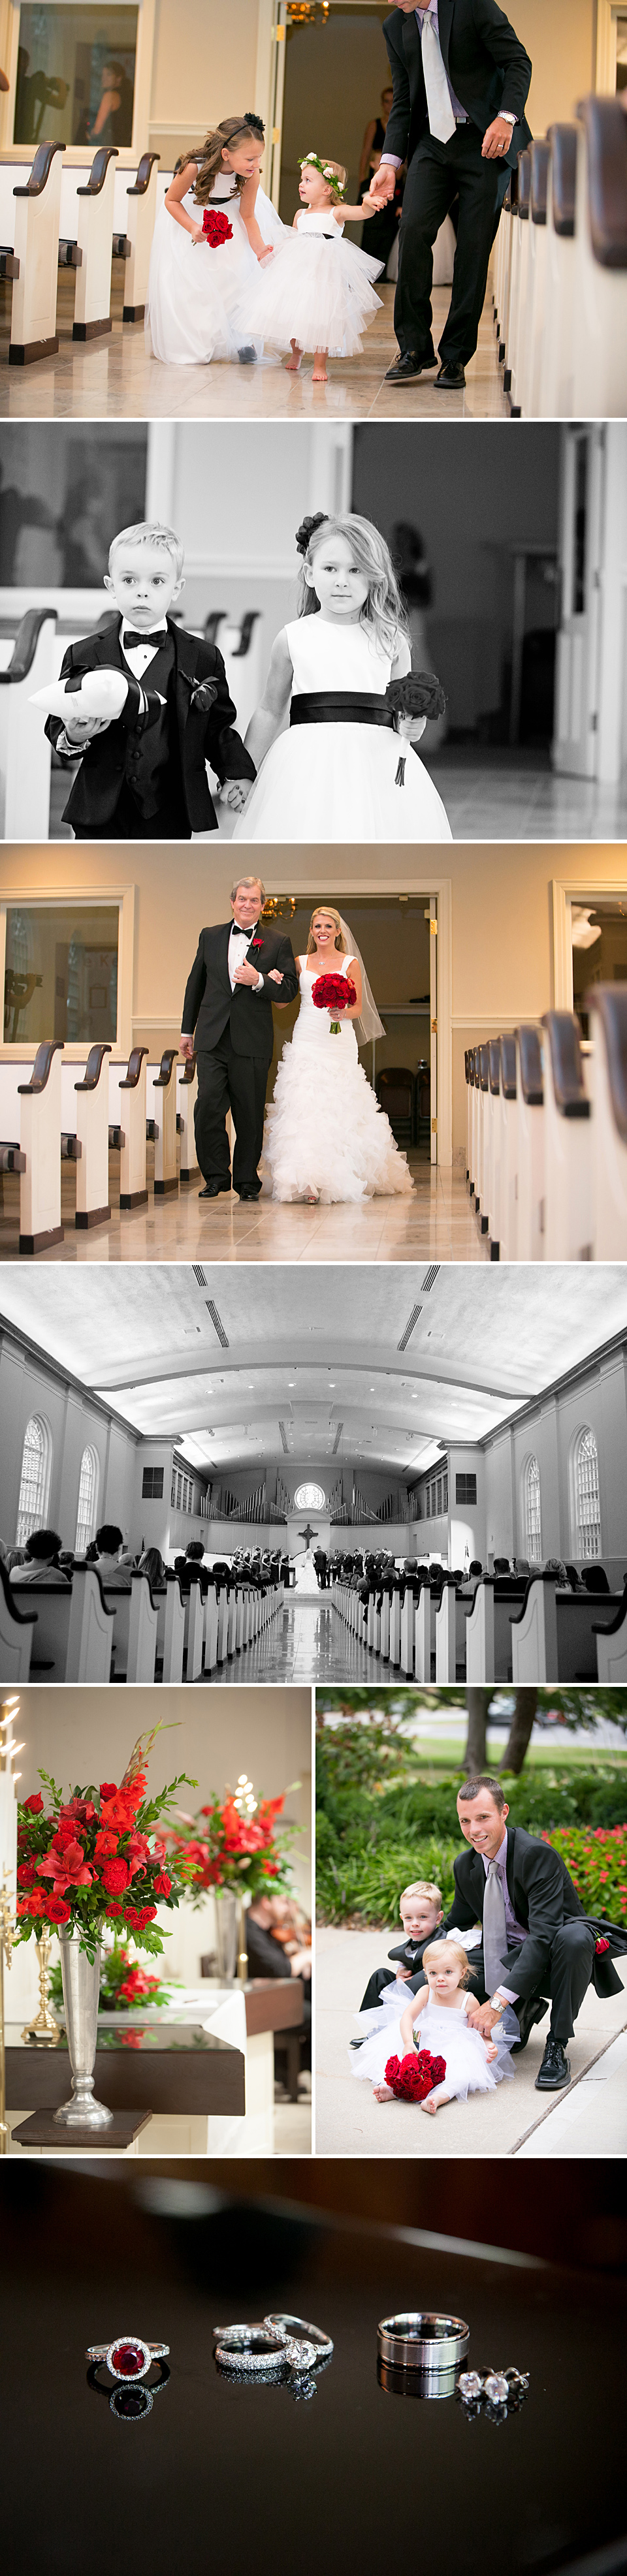 Church pictures, Wedding ceremony, KC weddings, Father of bride, Lemonlime, Helios String Quartet, Clay Cook